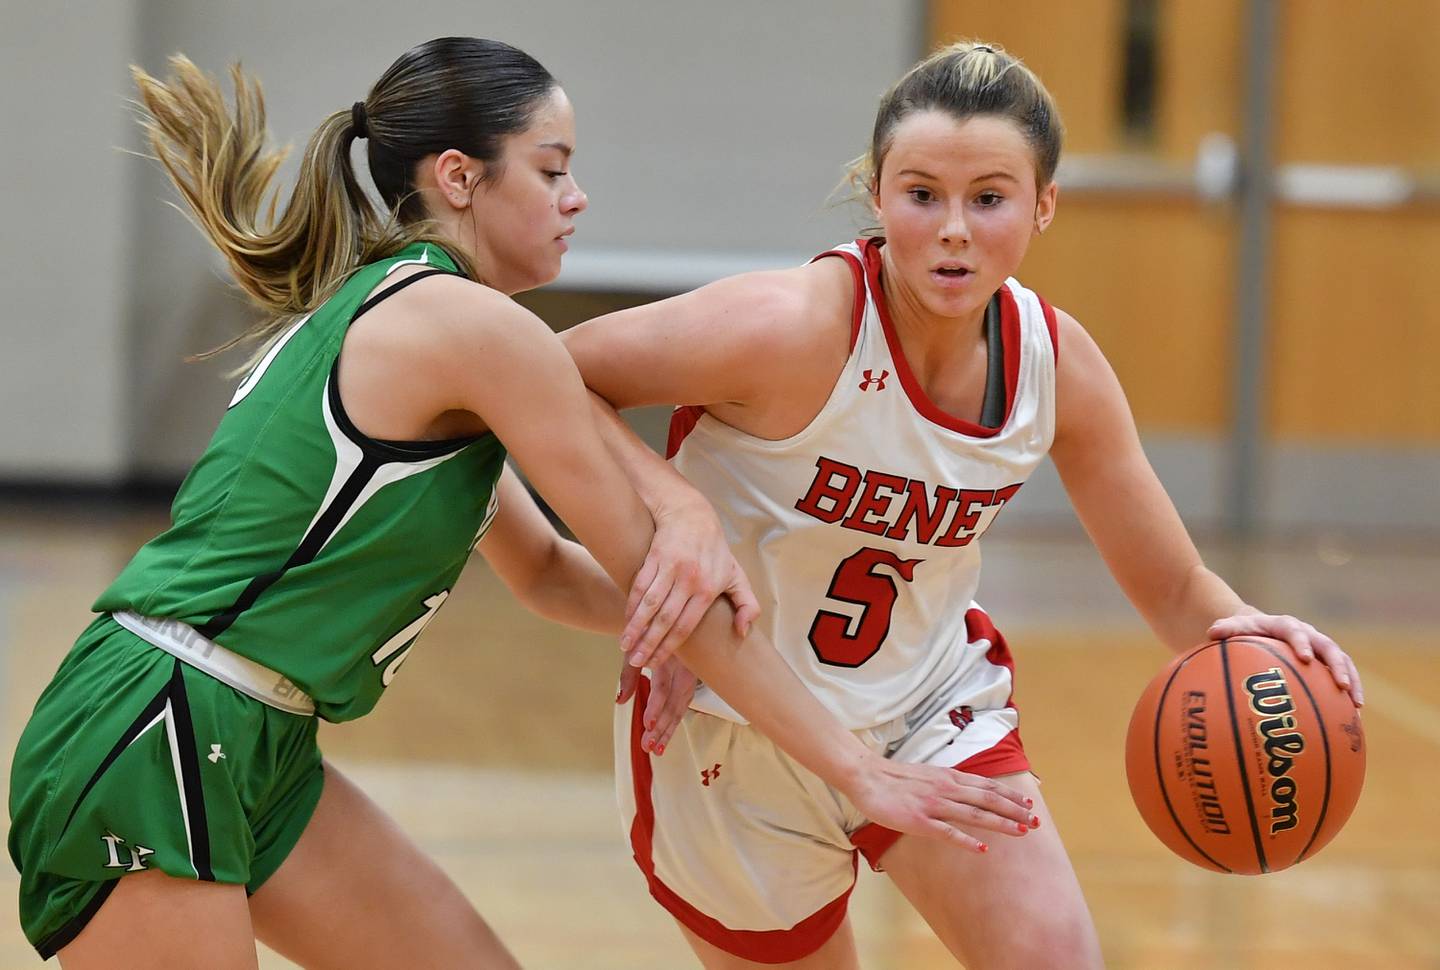 Benet’s Lenee Beaumont (5) drives past York's Lizzie Baldridge during a game on Dec. 20, 2022 at Benet Academy in Lisle.